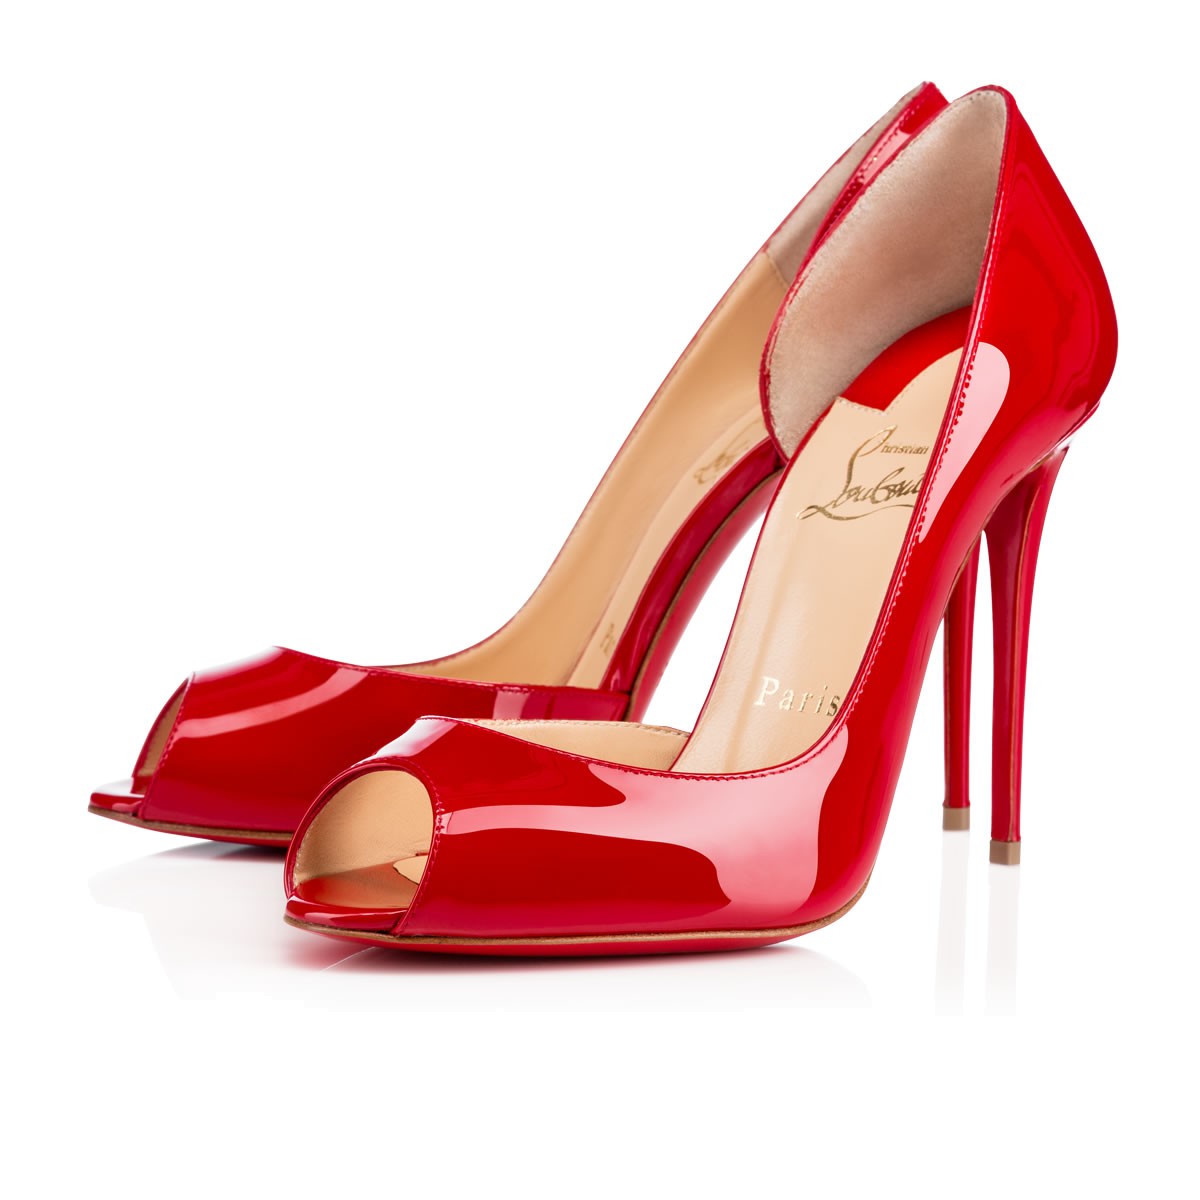 CHRISTIAN LOUBOUTIN Demi You 100 Oeillet Patent Leather - Women Shoes ...